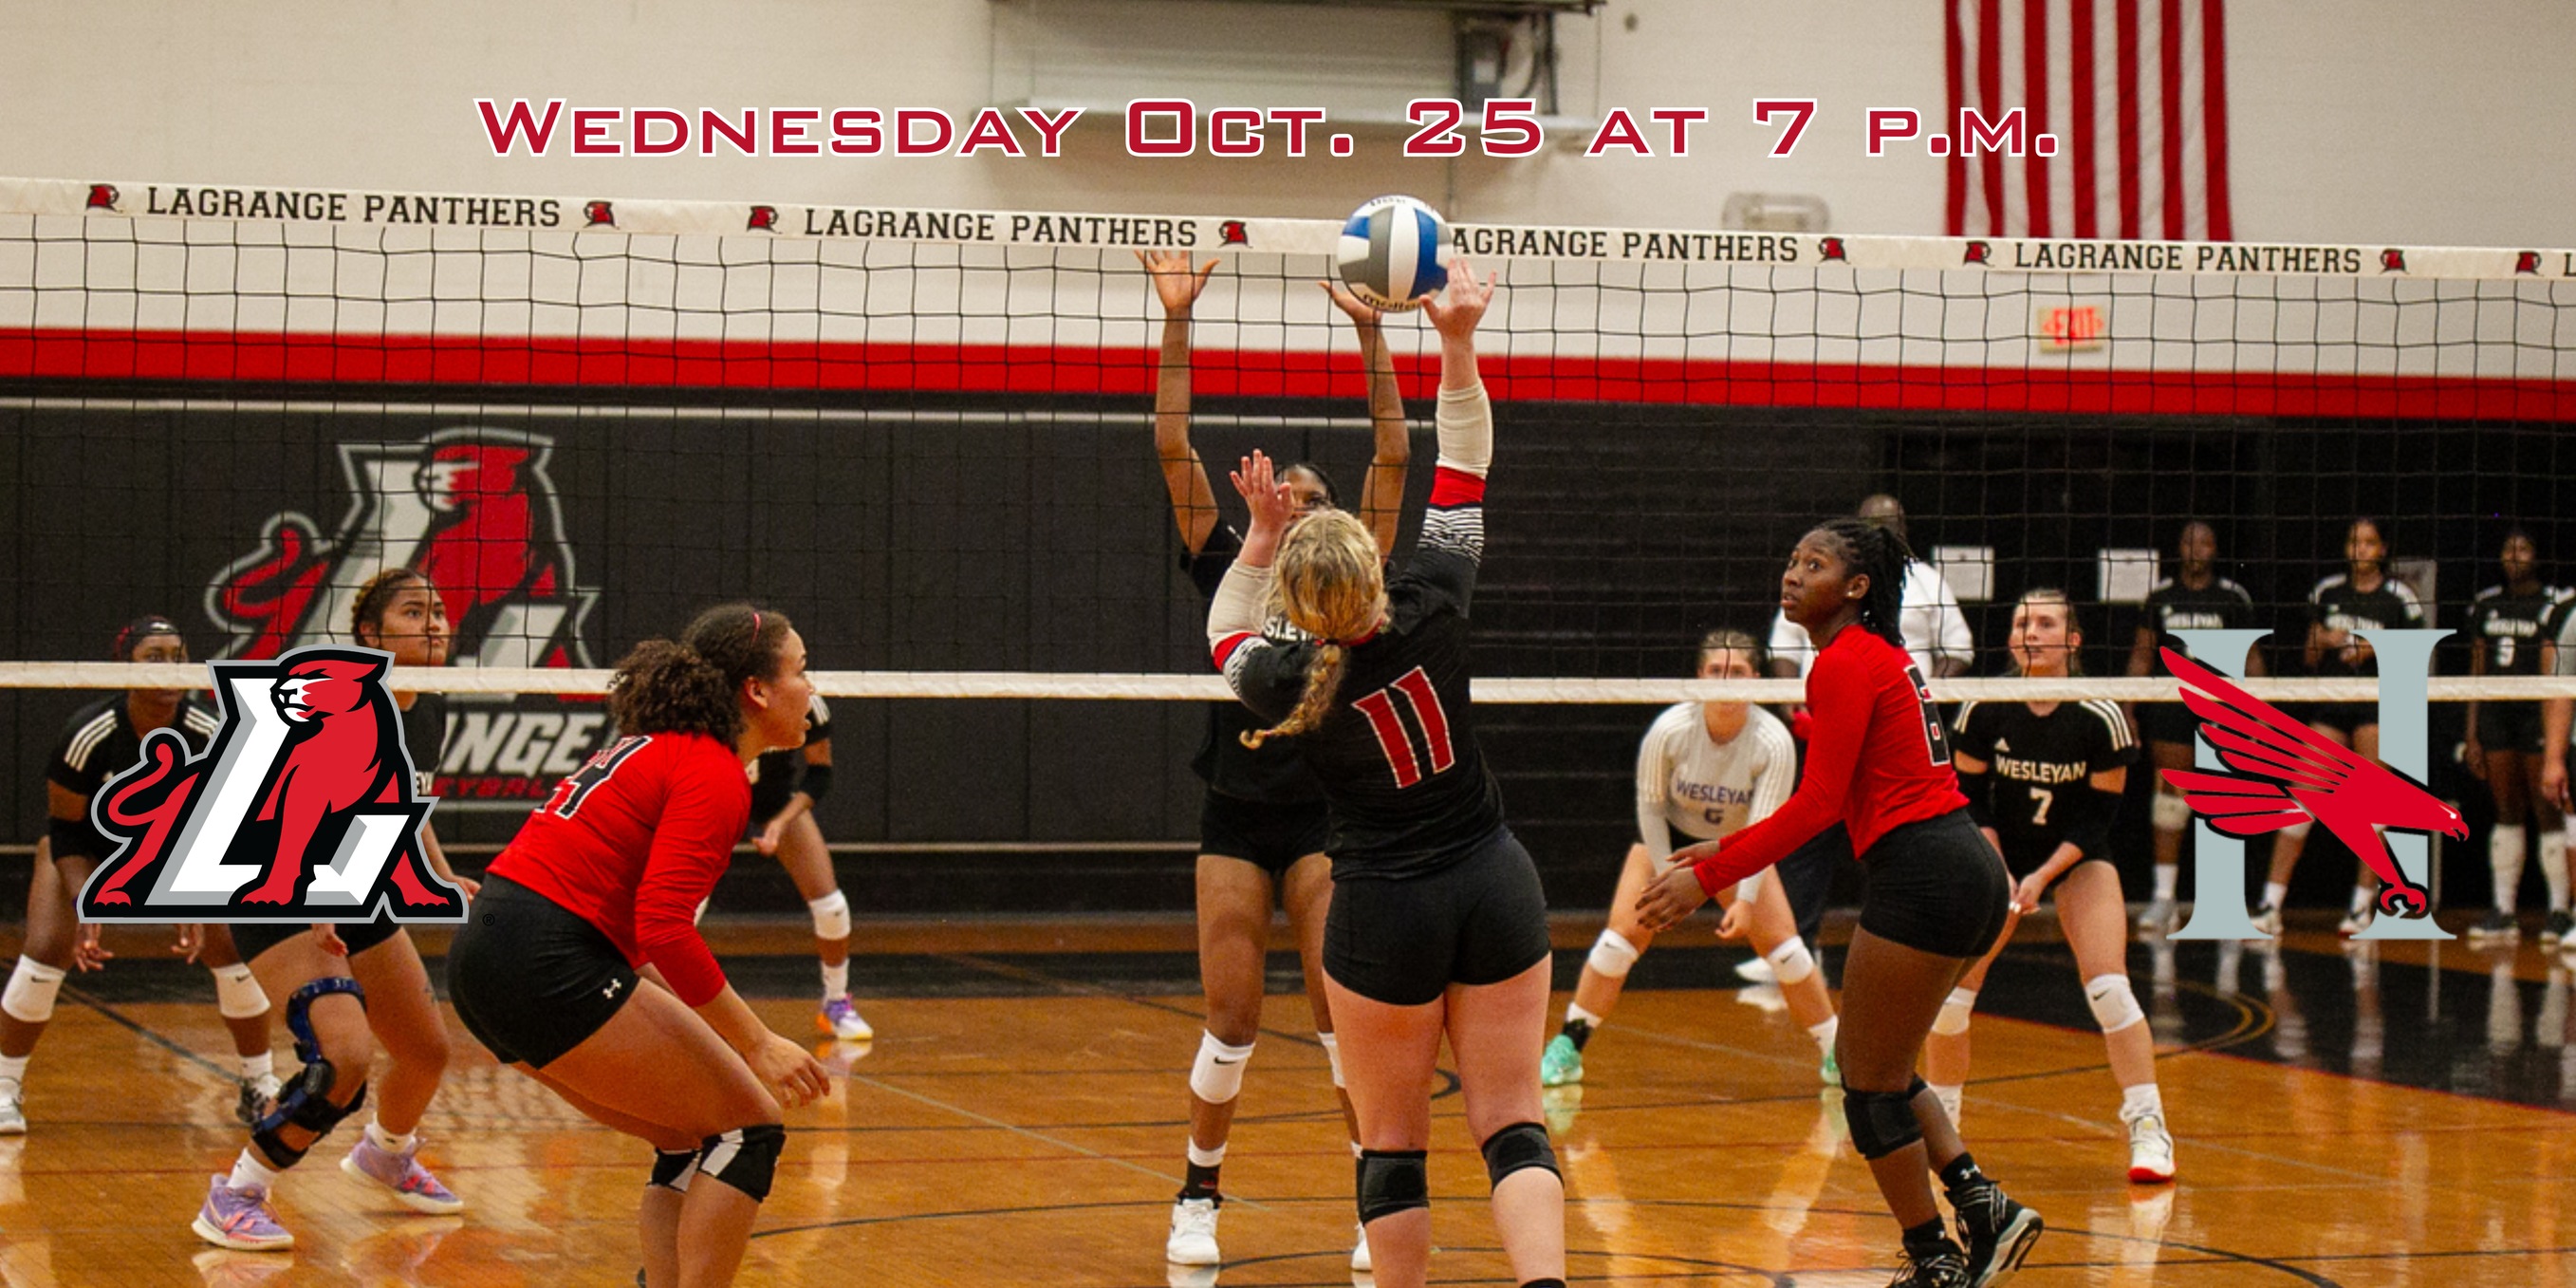 Panther volleyball takes on the Hawks at home this Wednesday (Oct. 25)